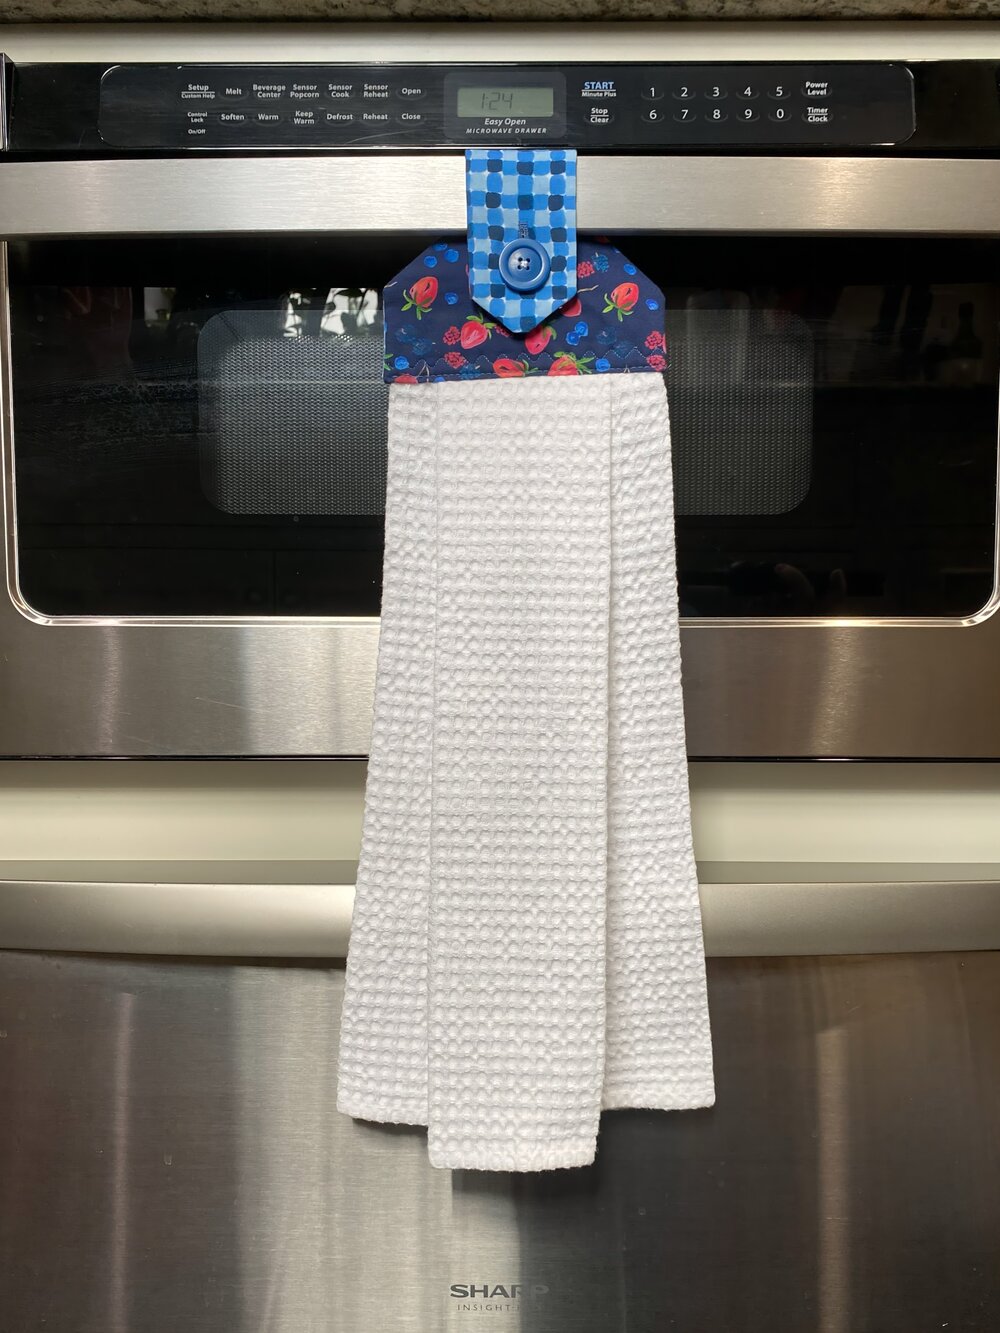 Geometry Strawberries Print Kitchen and Hand Towels at DLK